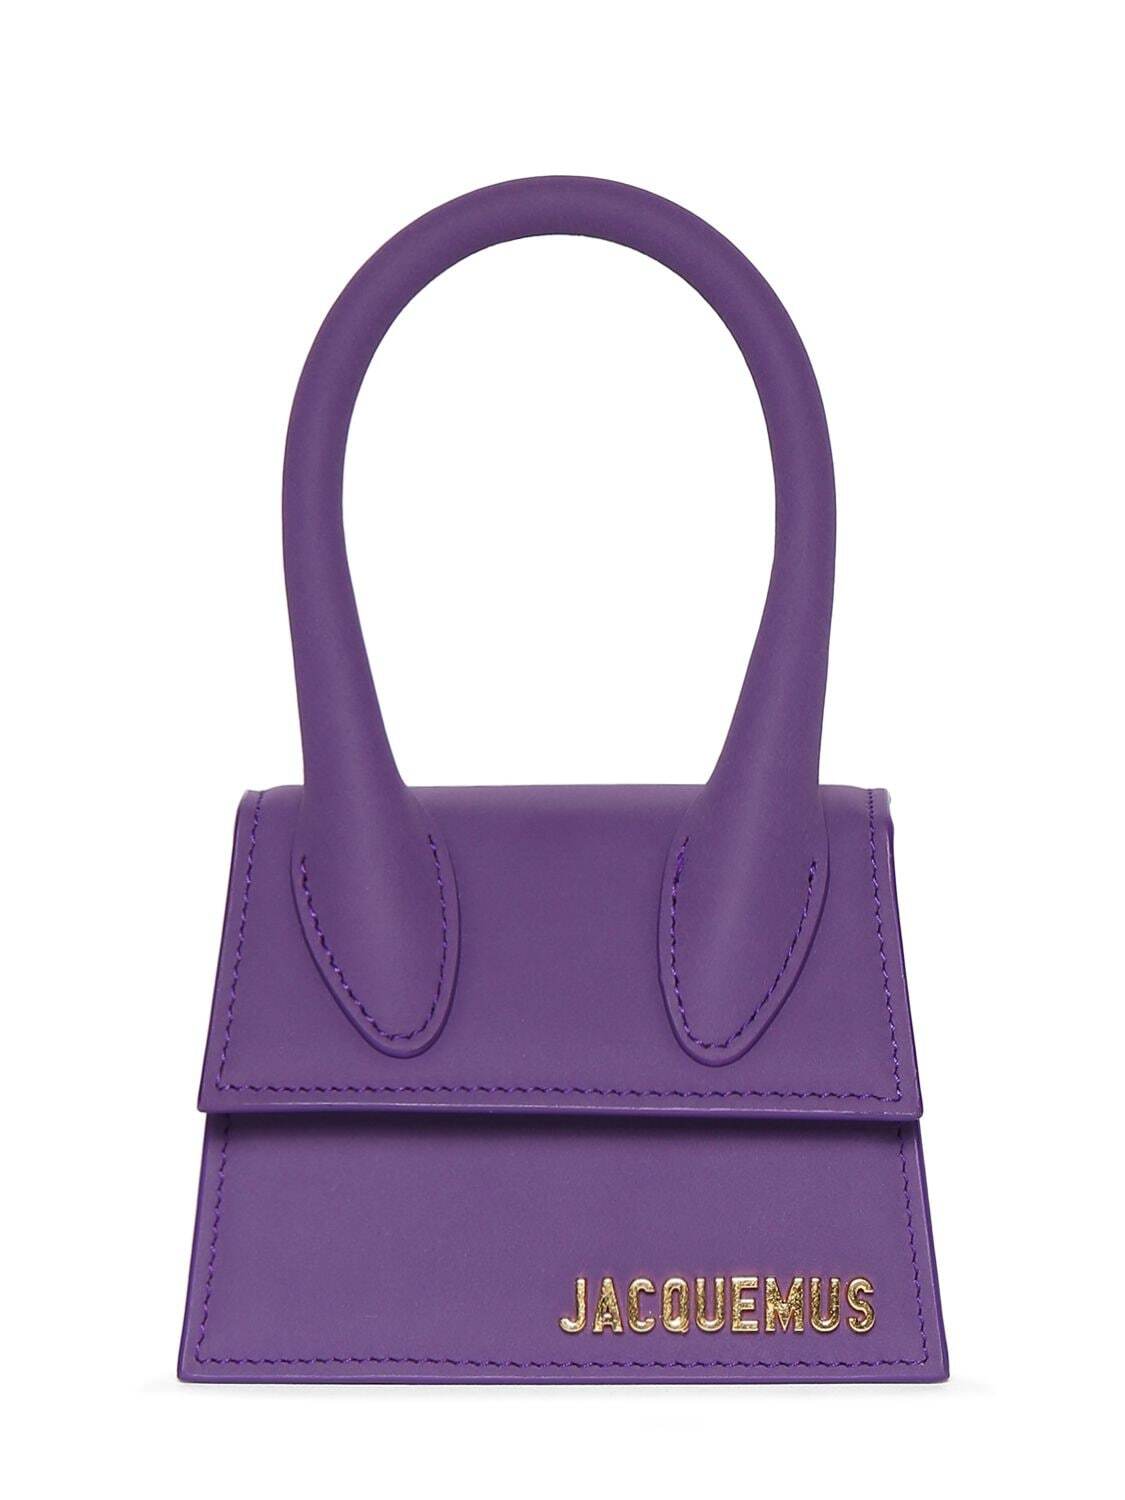 JACQUEMUS Le Chiquito Leather Top Handle Bag in purple